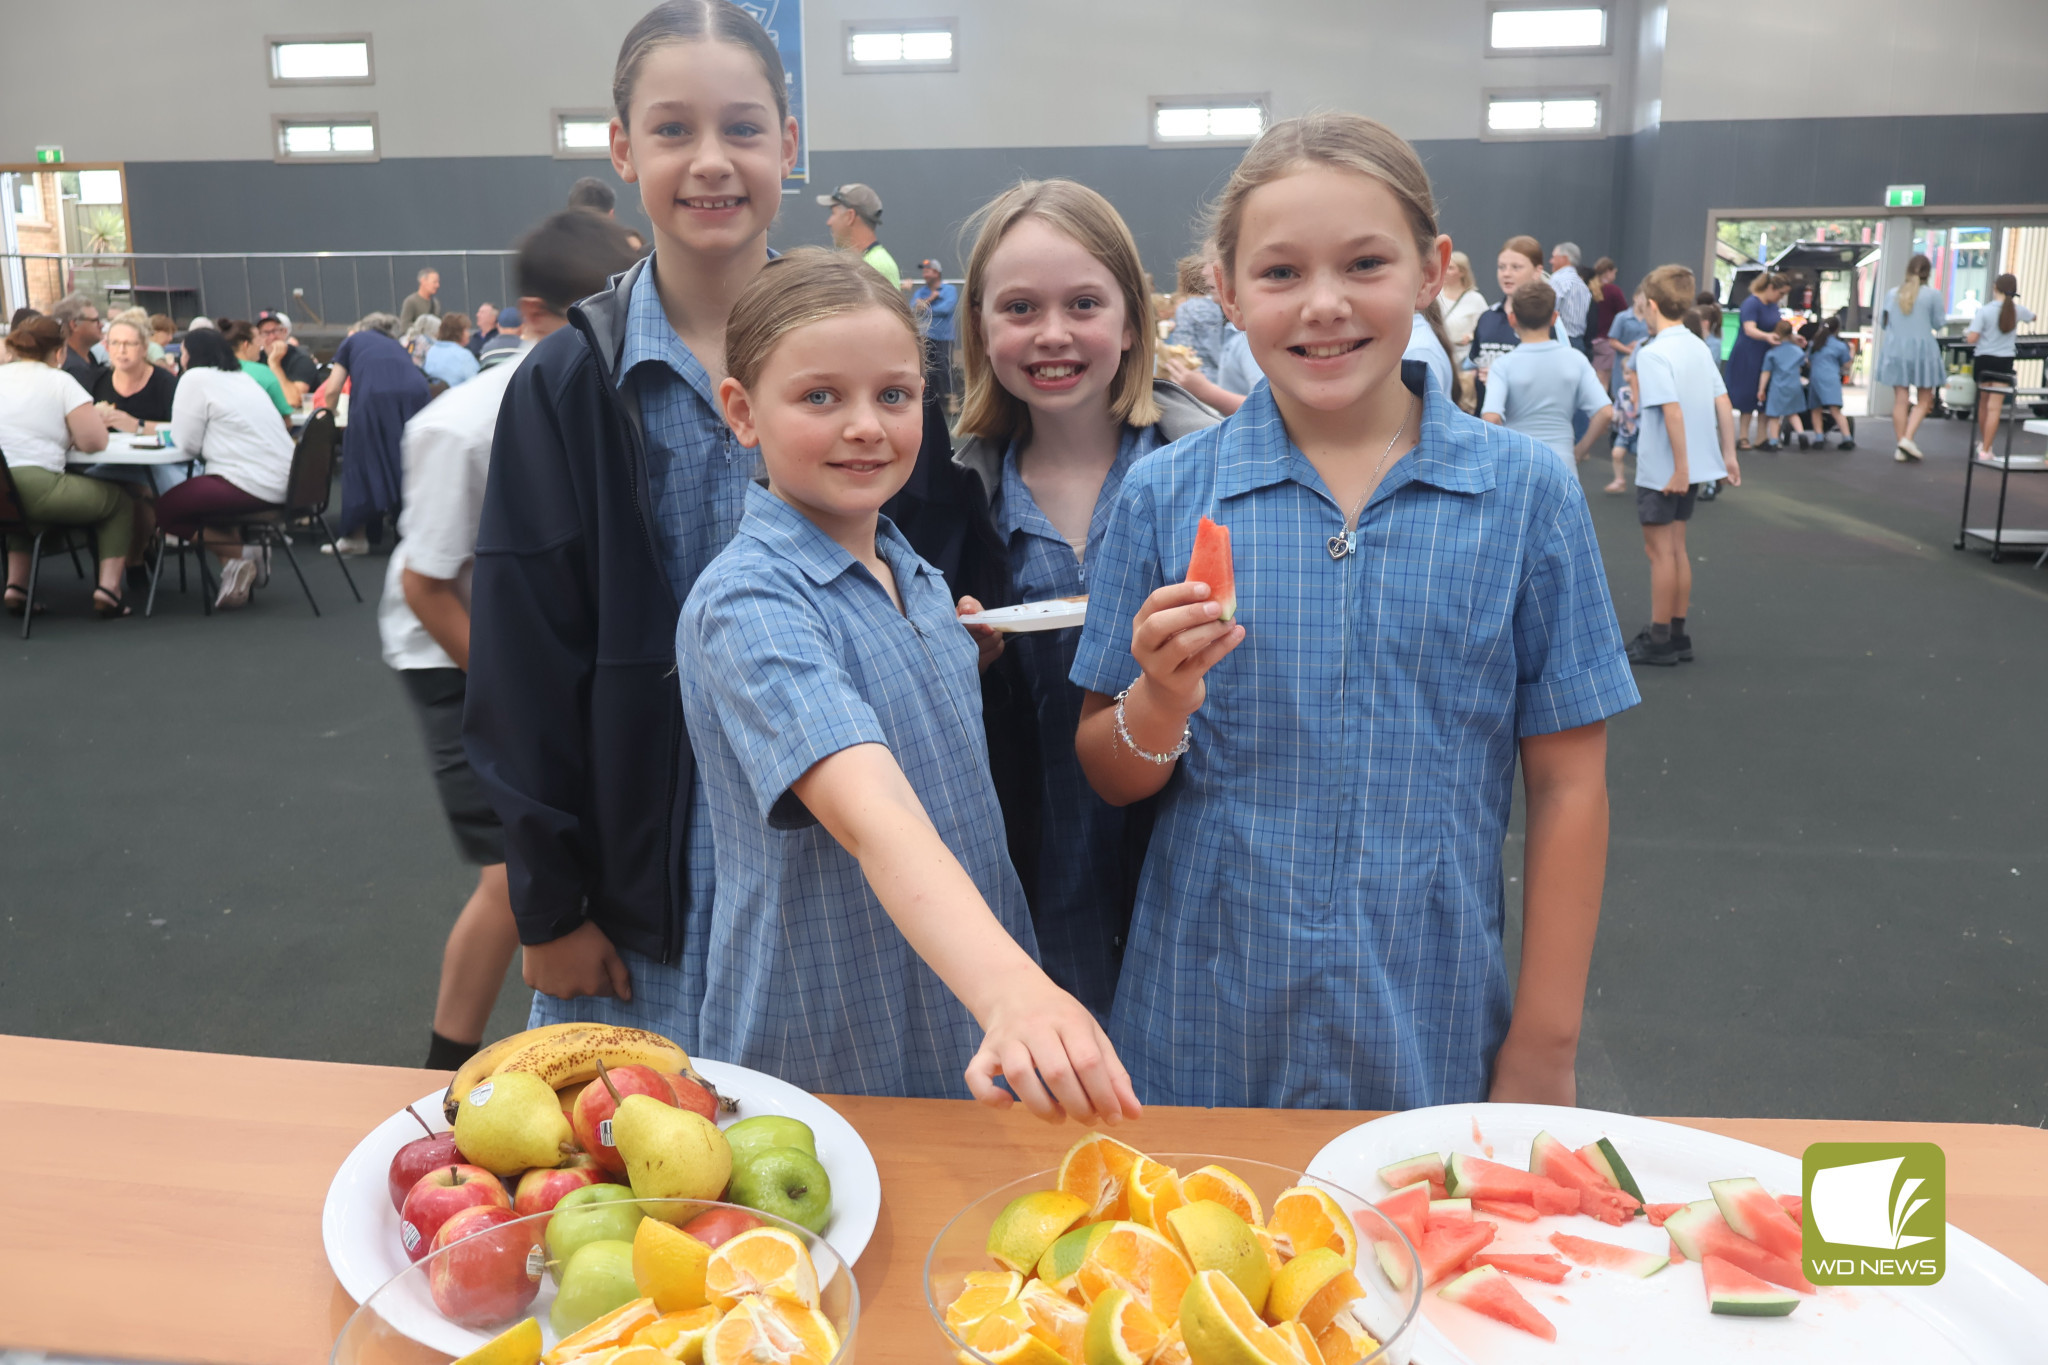 The most important meal: St Thomas' Primary School students Annabelle Blackford (from left), Mary Hefferman, Isabele and Lahnii O'Neill were among those to enjoy a successful Big Breakfast this year.